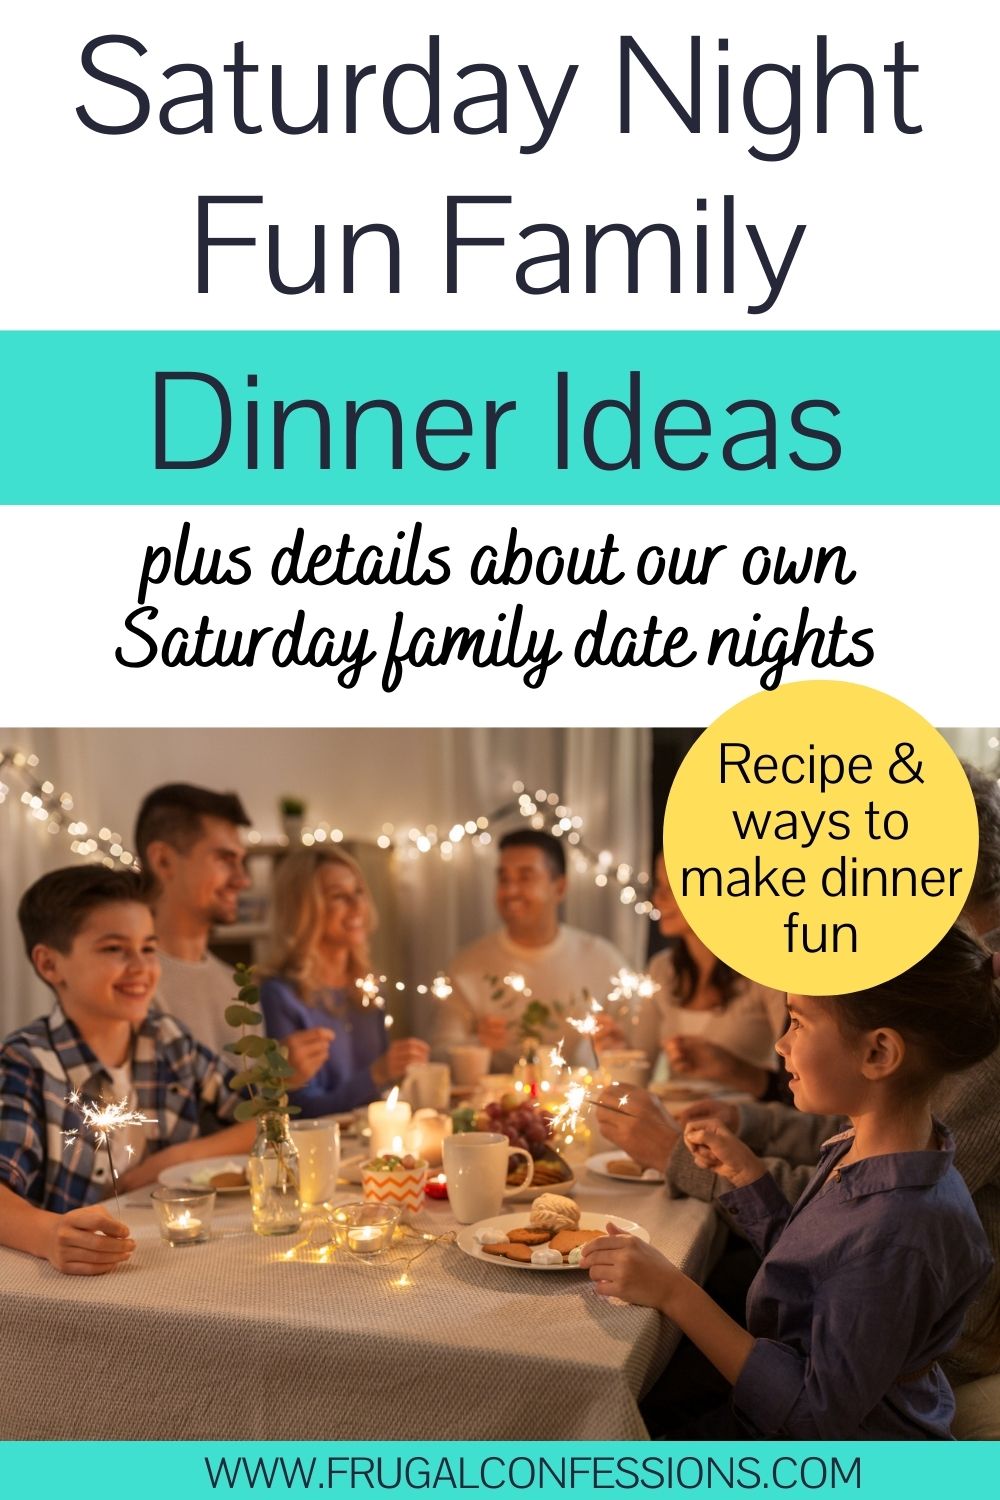 family dinner with string lights all around, text overlay "Saturday night fun family dinner ideas"